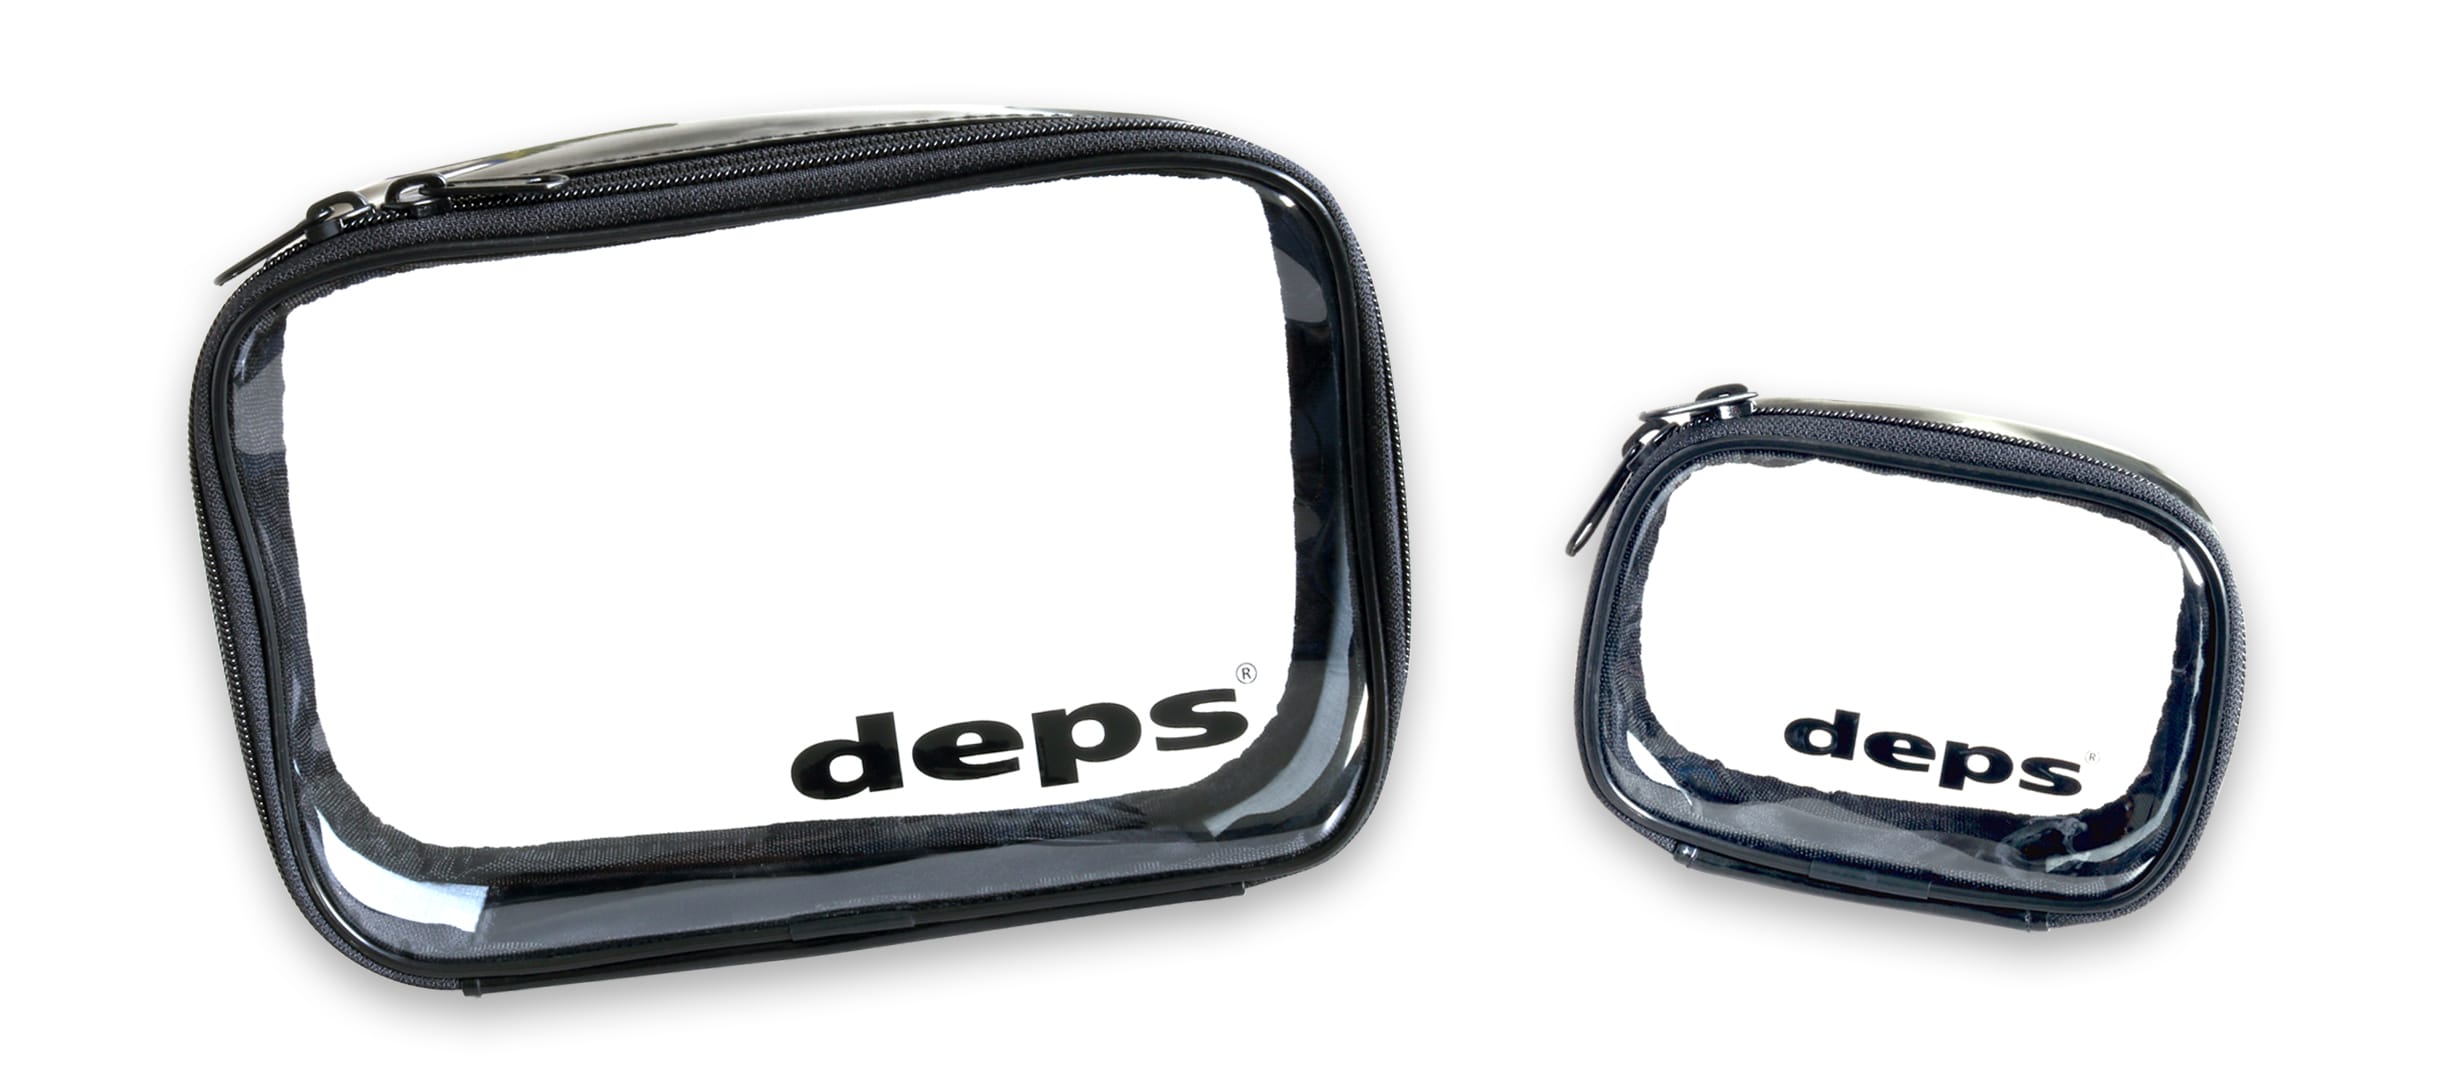 deps MULTI POUCH | deps OFFICIAL HP | デプス 公式HP